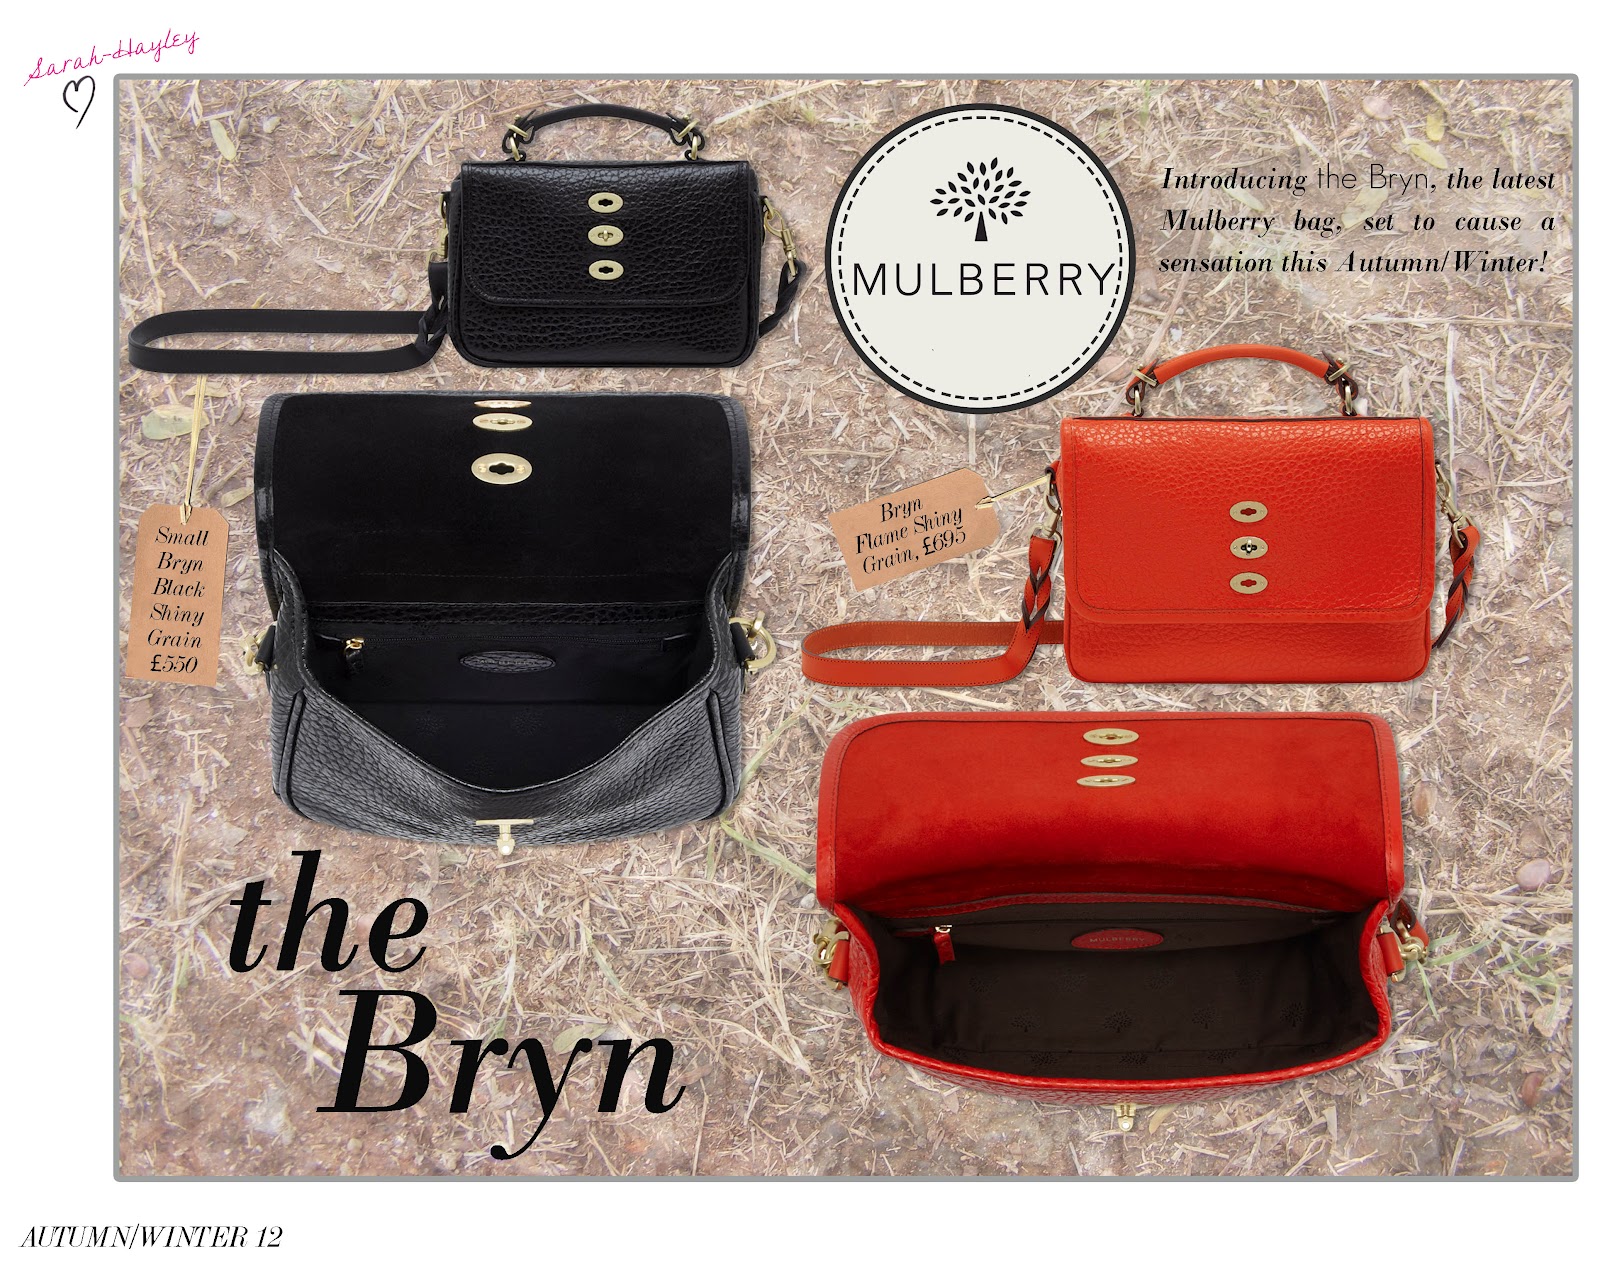 Handbag Crush - Introducing the New Mulberry Bryn - by Sarah 